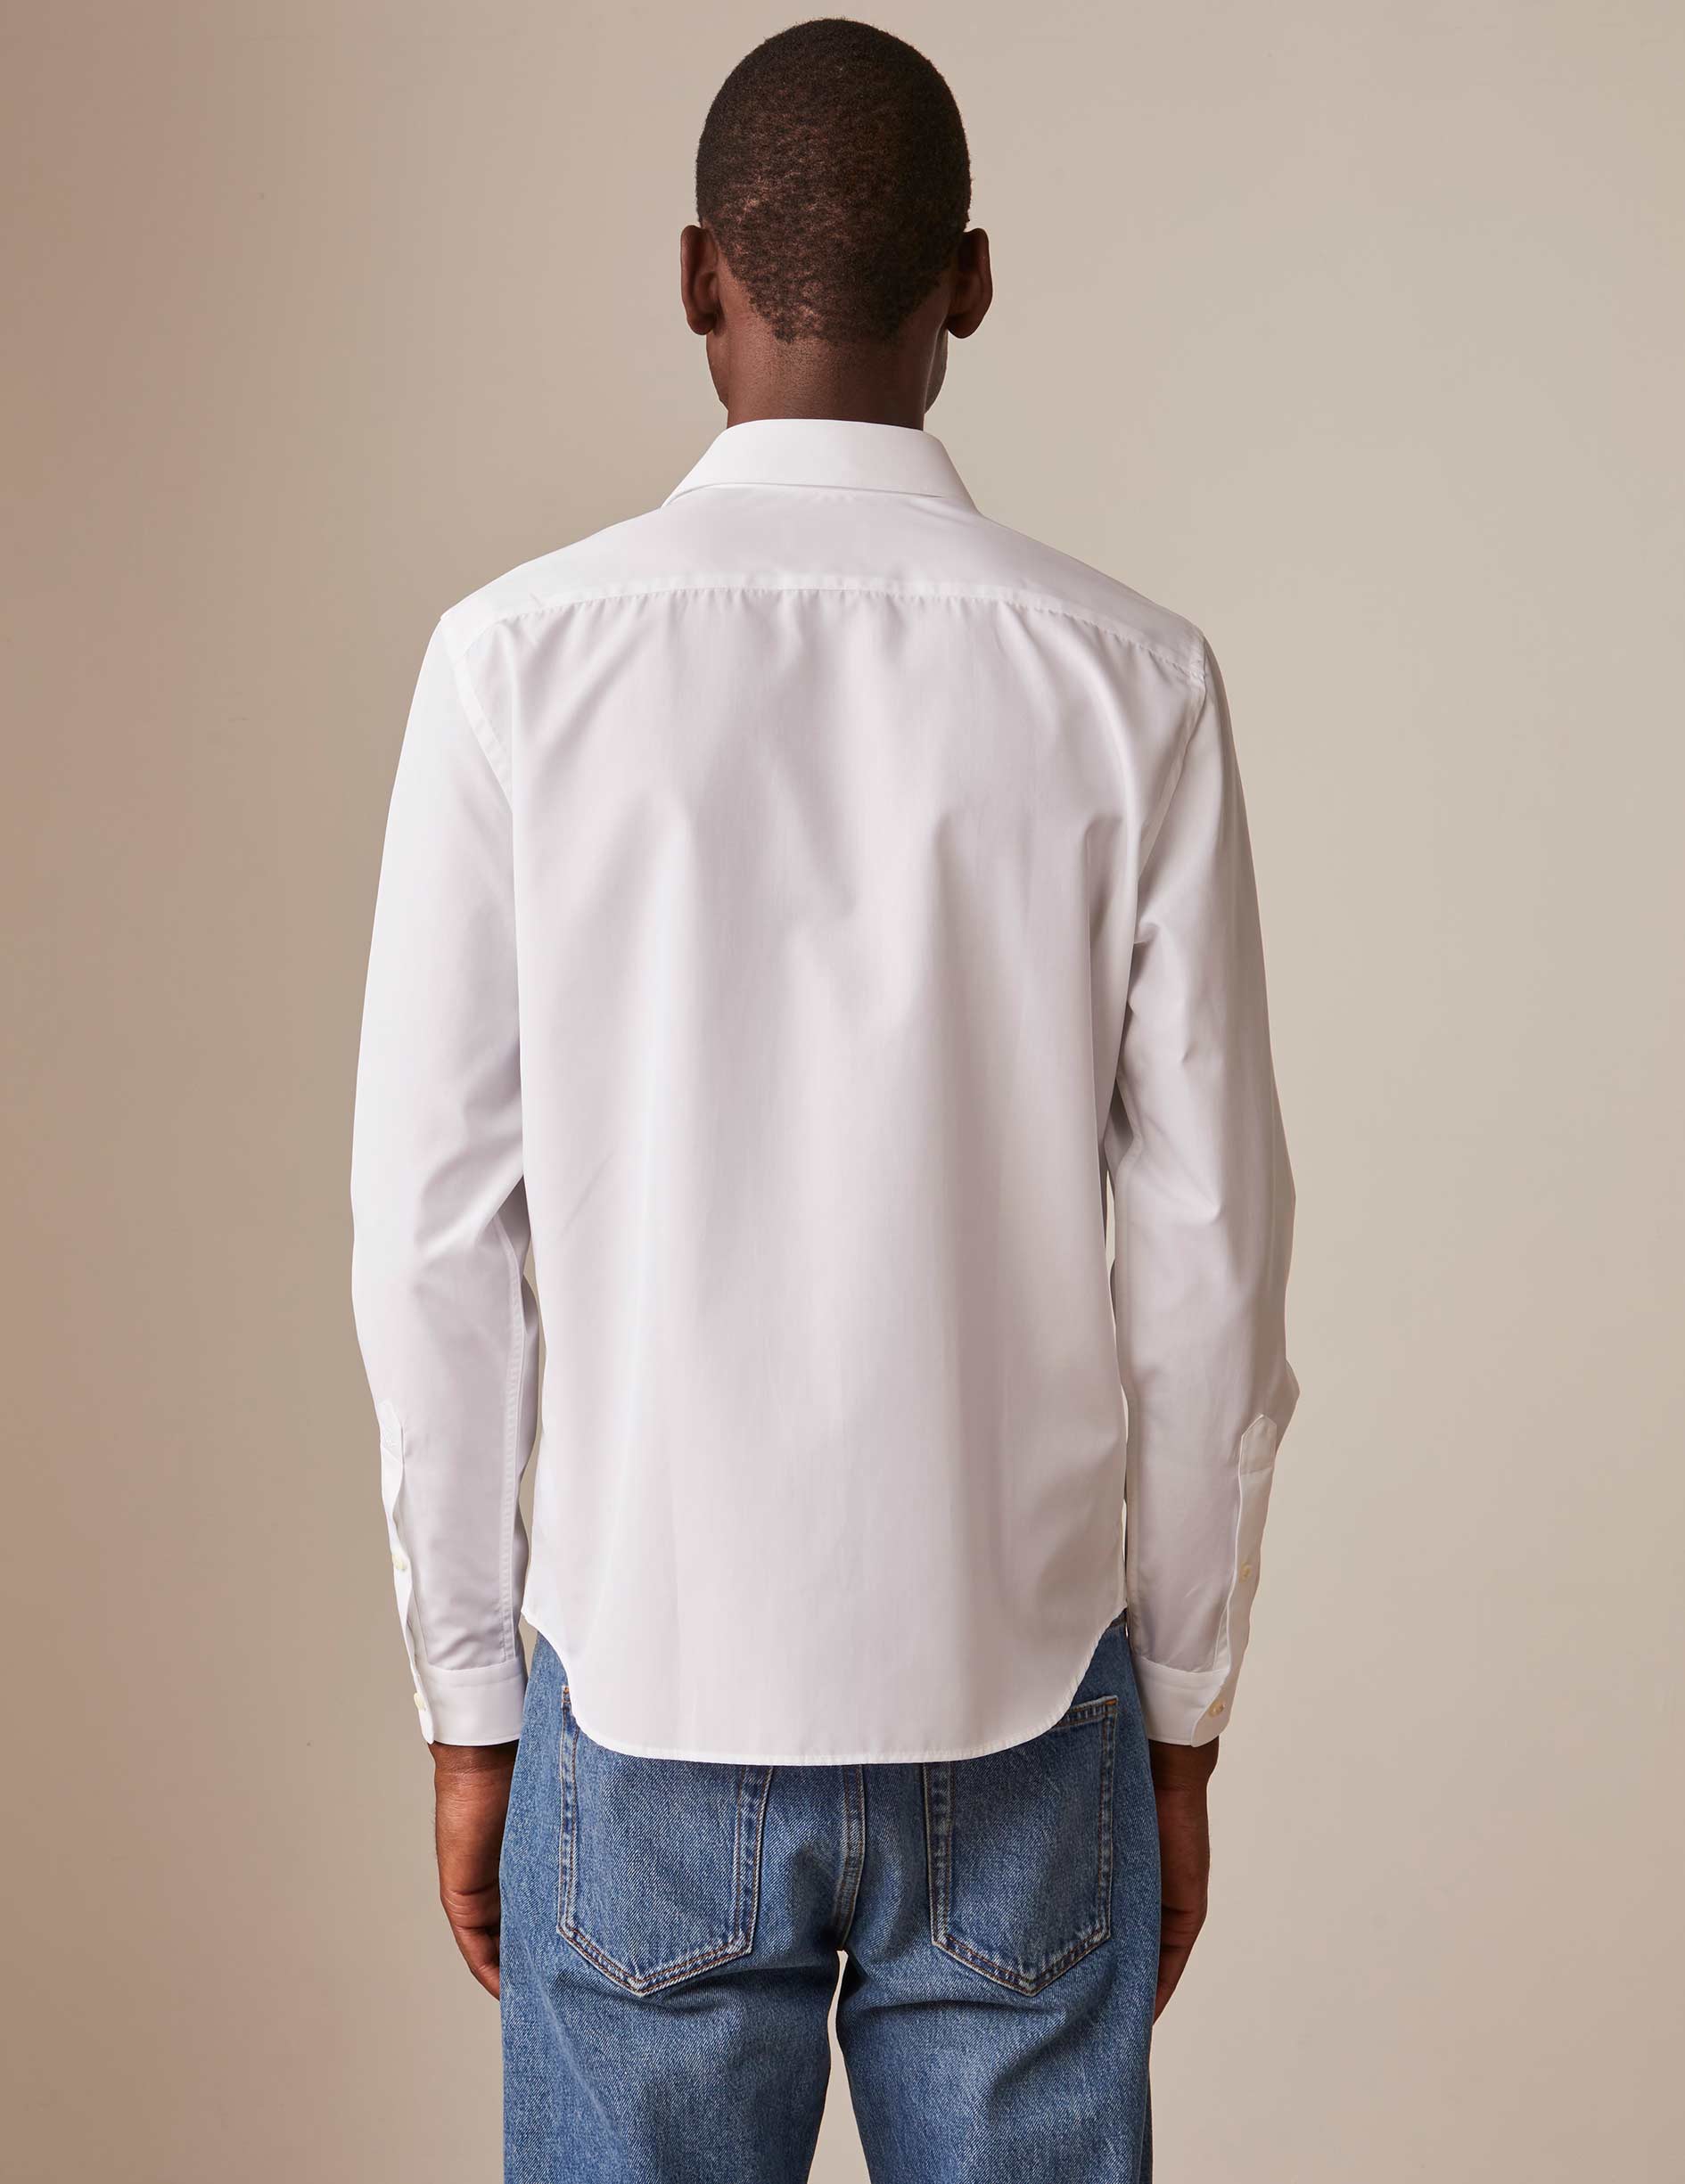 White "Je t'aime" shirt with gold embroidery - Poplin - Figaret Collar